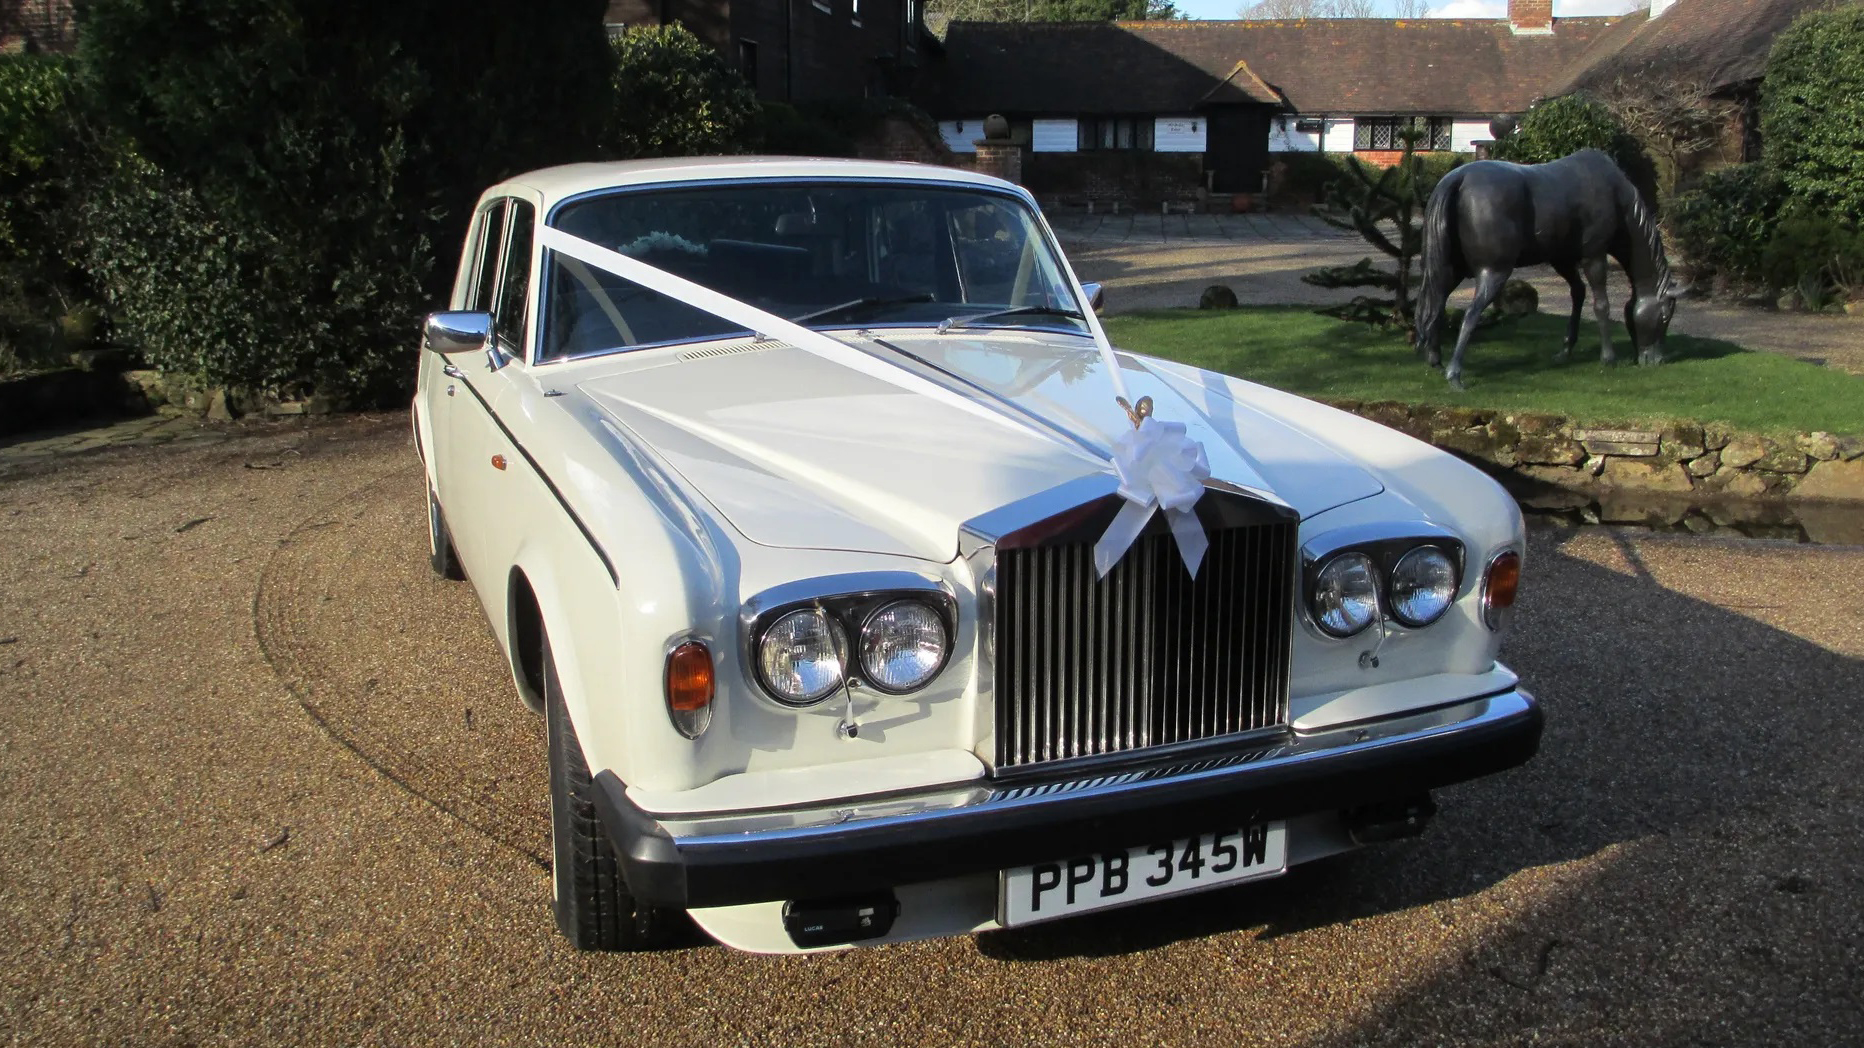 Classic rols-Royce SilveR shadow in White decorated with With ribbons and Bow on top of the Chrome Grill